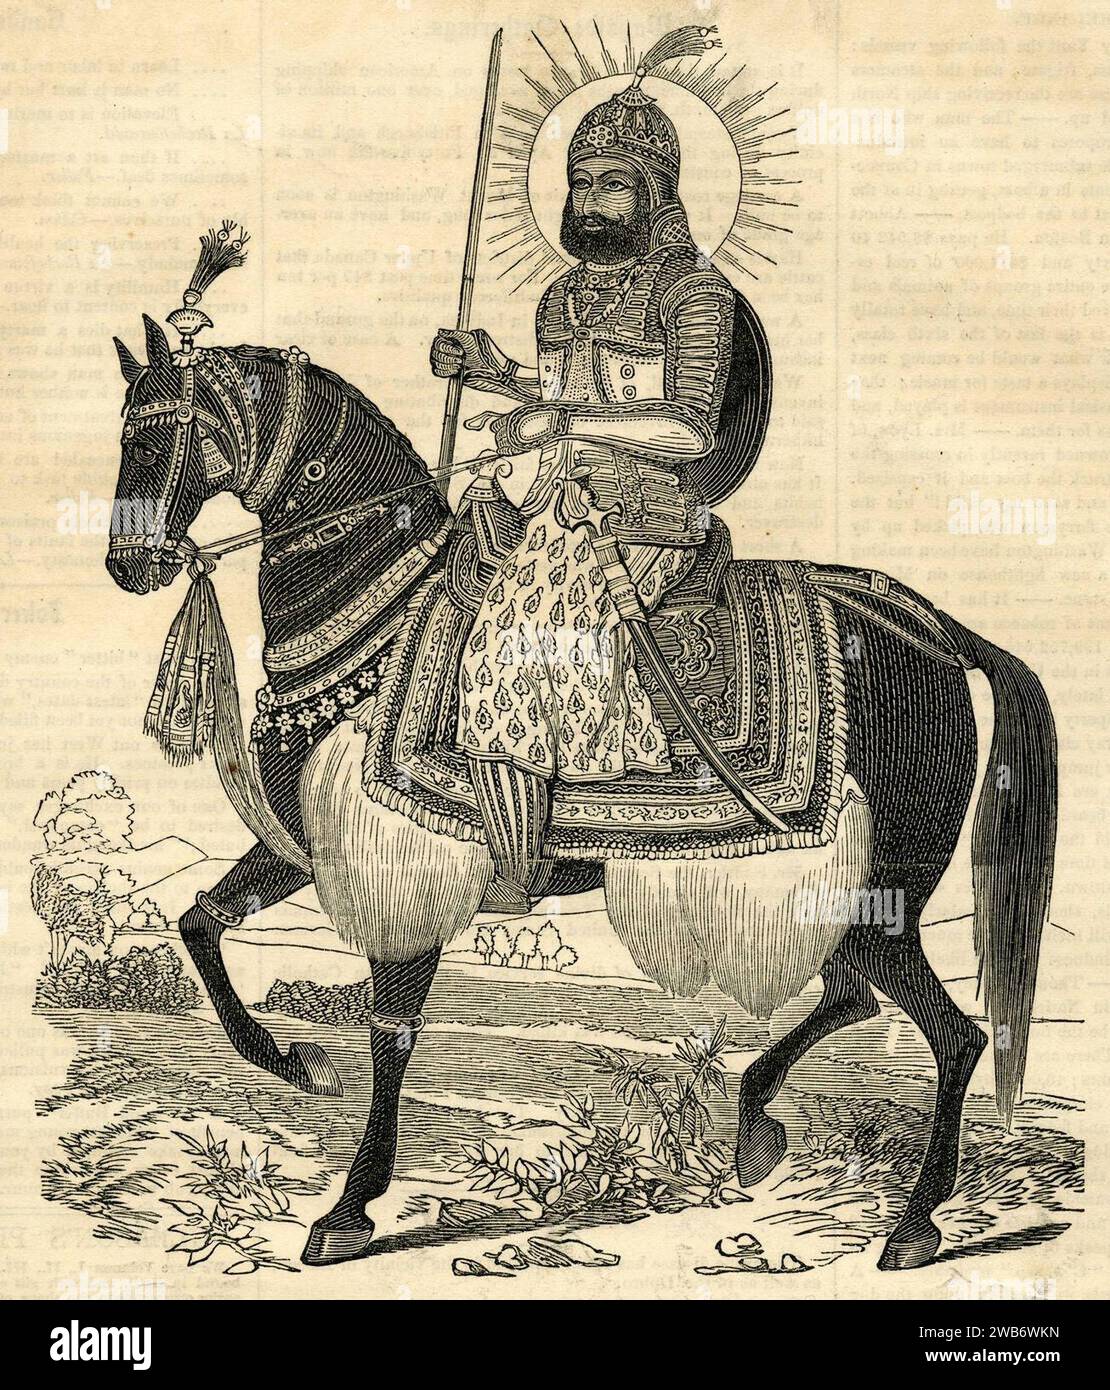 1854 engraving of Maharaja Karam Singh of Patiala, who reigned from 1813 to 1845. Stock Photo